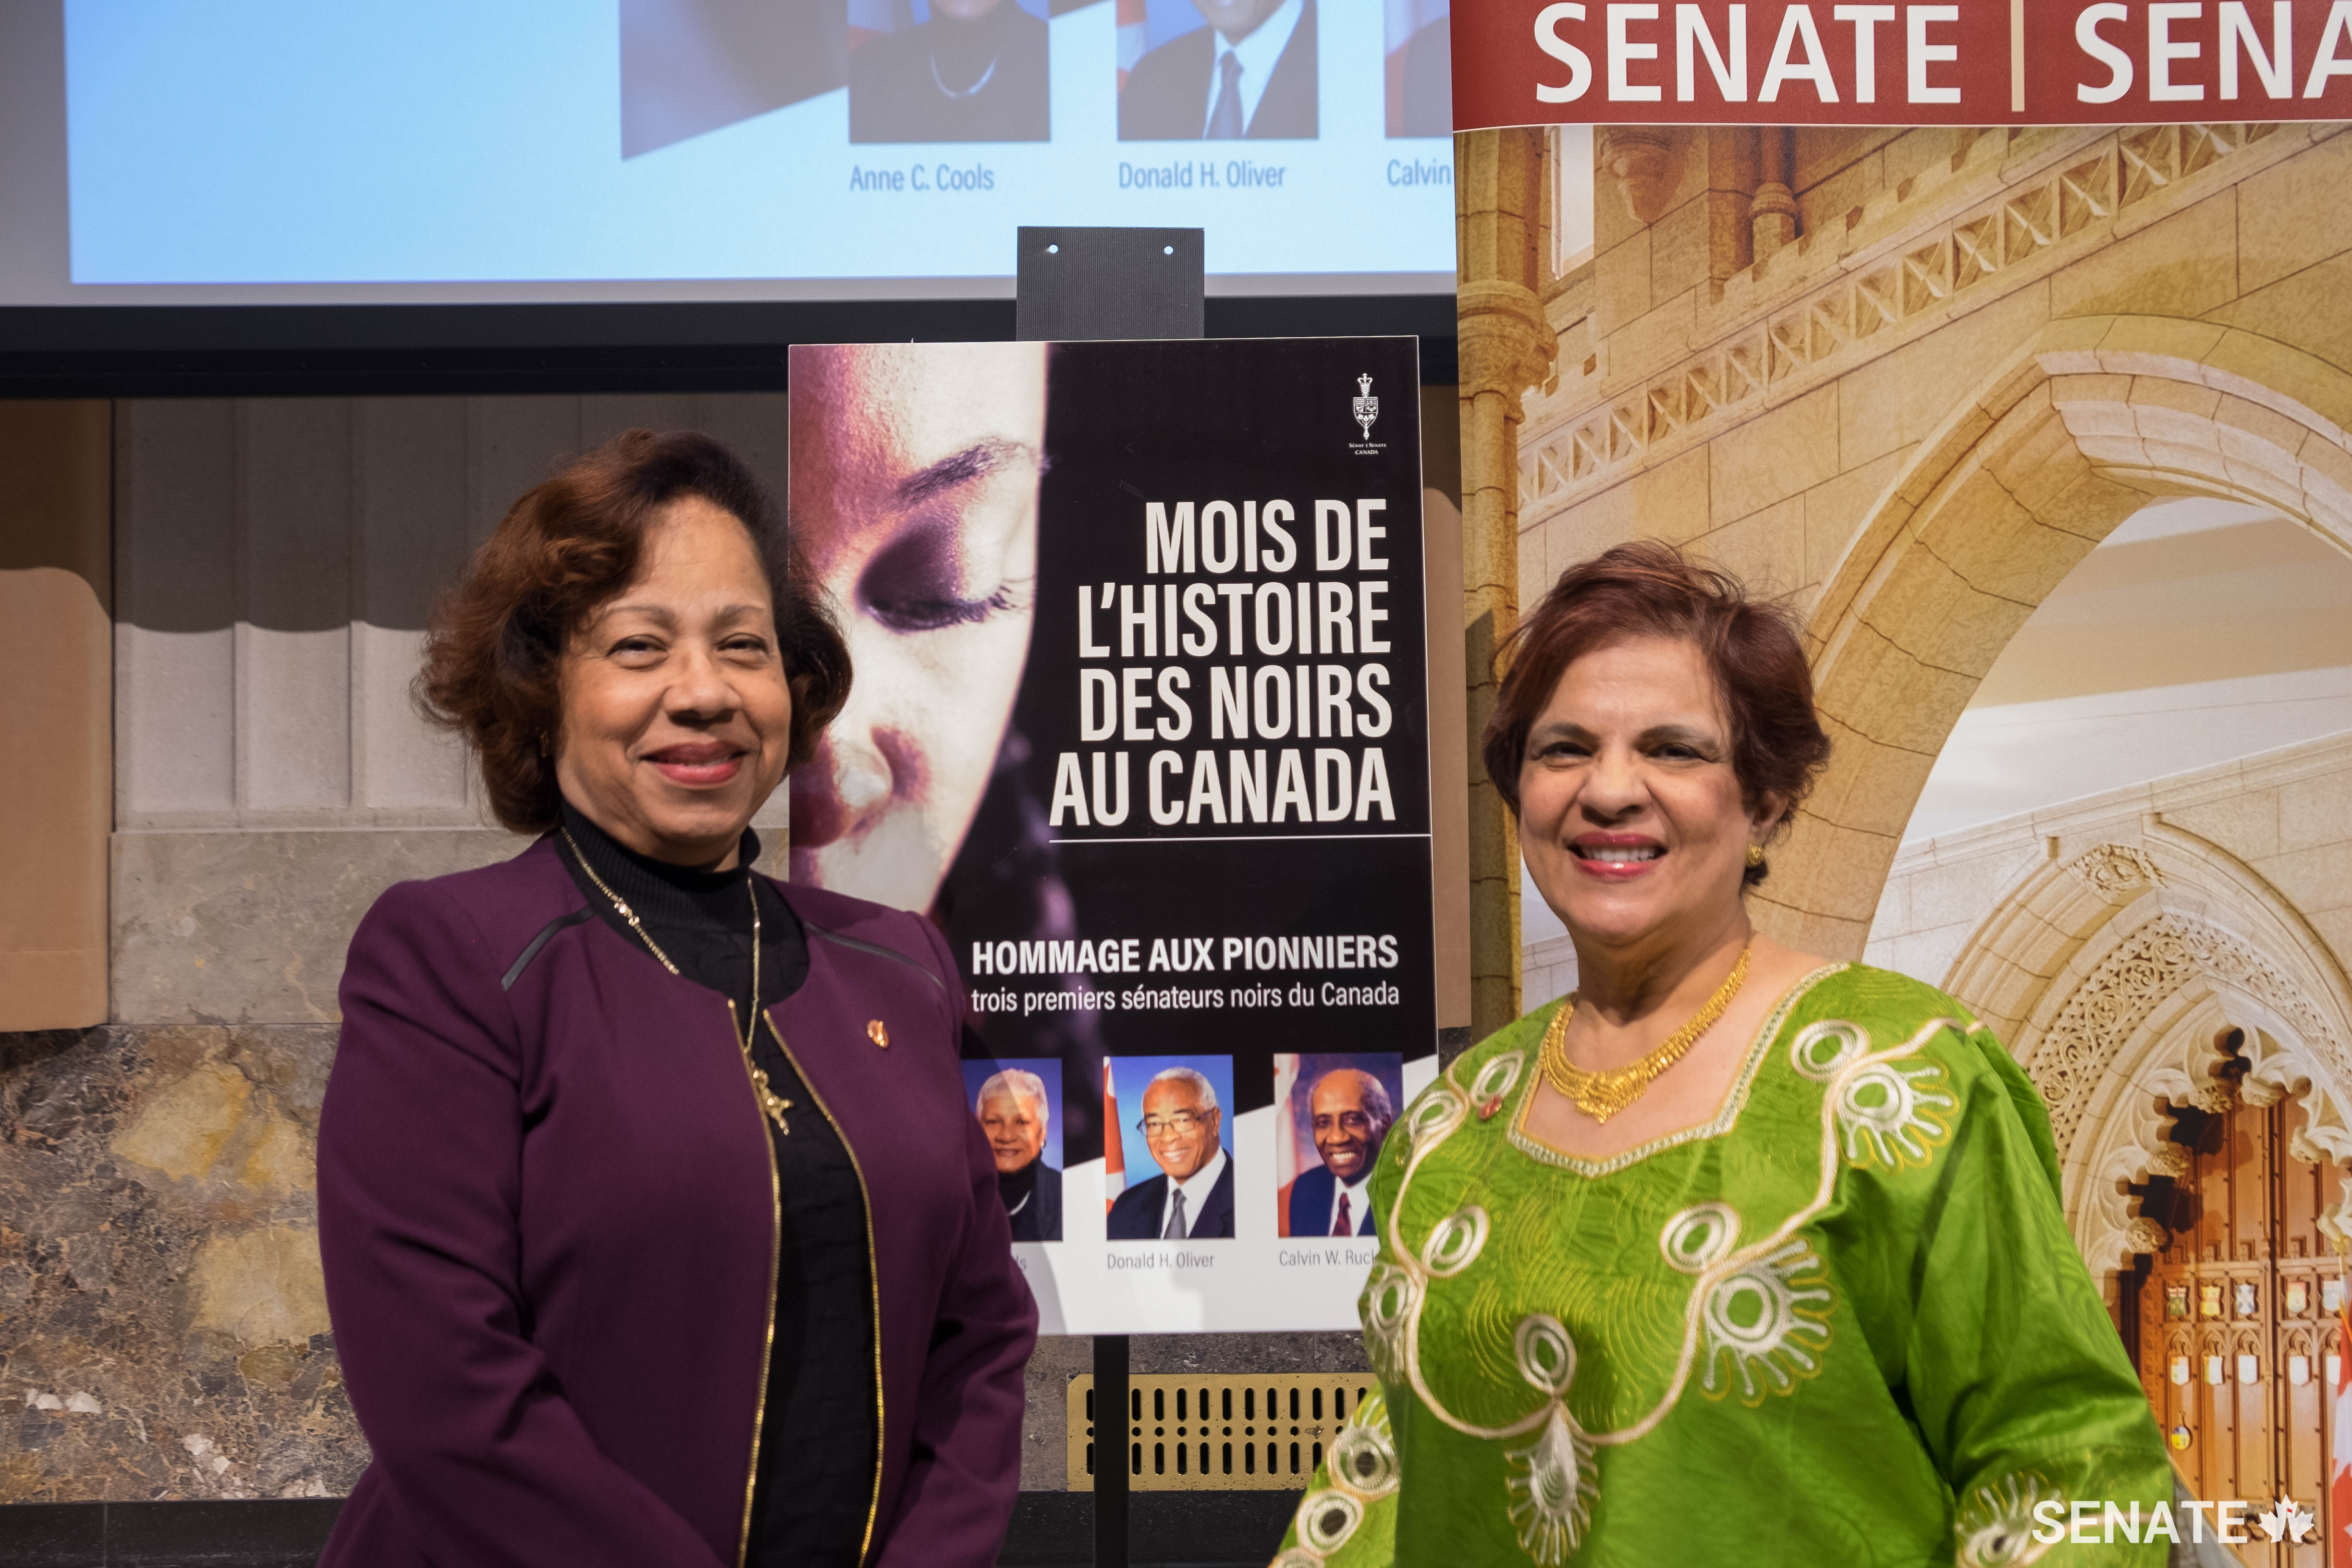 Senators Mégie (left) and Jaffer (right) spoke about their respective journeys to Canada from Haiti and Uganda, respectively.